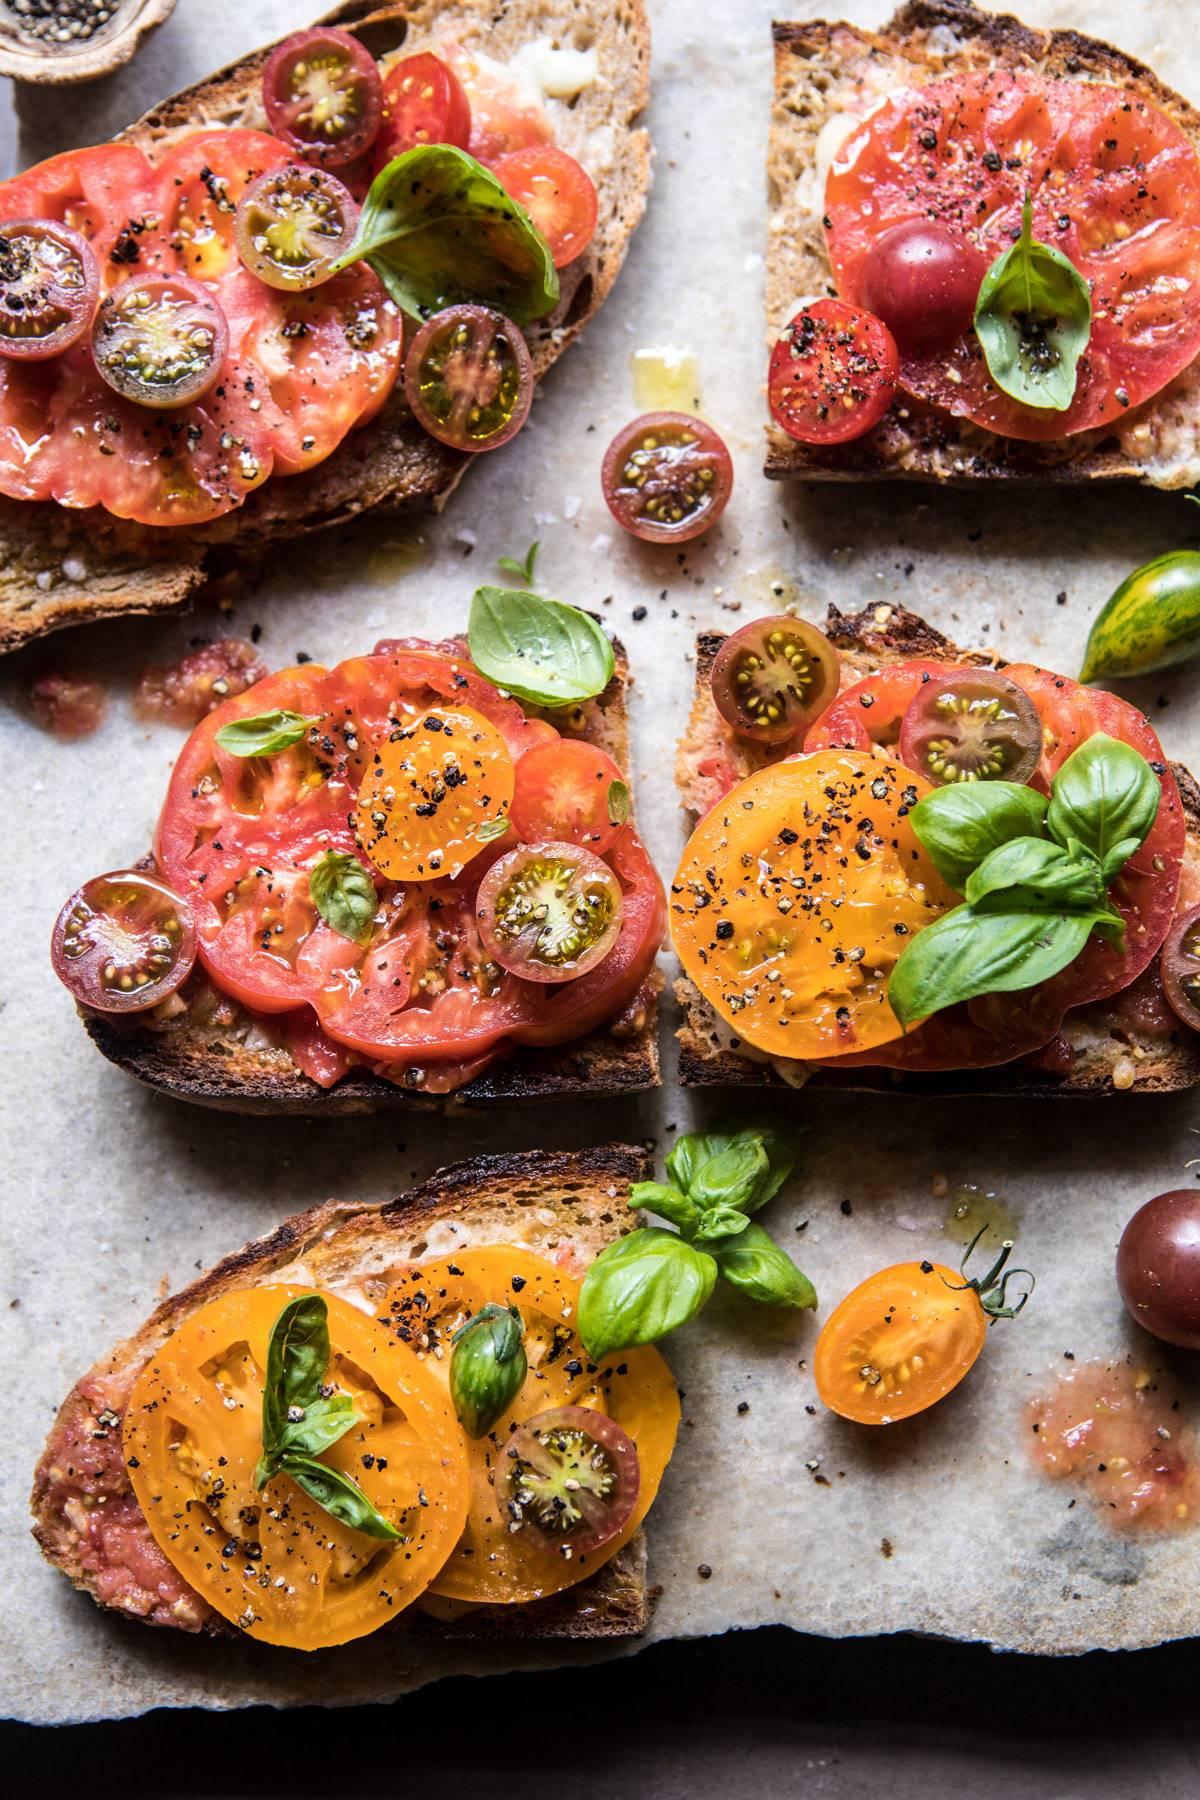 While your bread is toasting, slice up a tomato and some manchego, layer them on the bread, and finish with a drizzle of olive oil and a sprinkle of basil, salt, and pepper. (via <a href="https://www.halfbakedharvest.com/heirloom-tomato-basil-and-manchego-toast/"><strong>Half Baked Harvest</strong></a>)